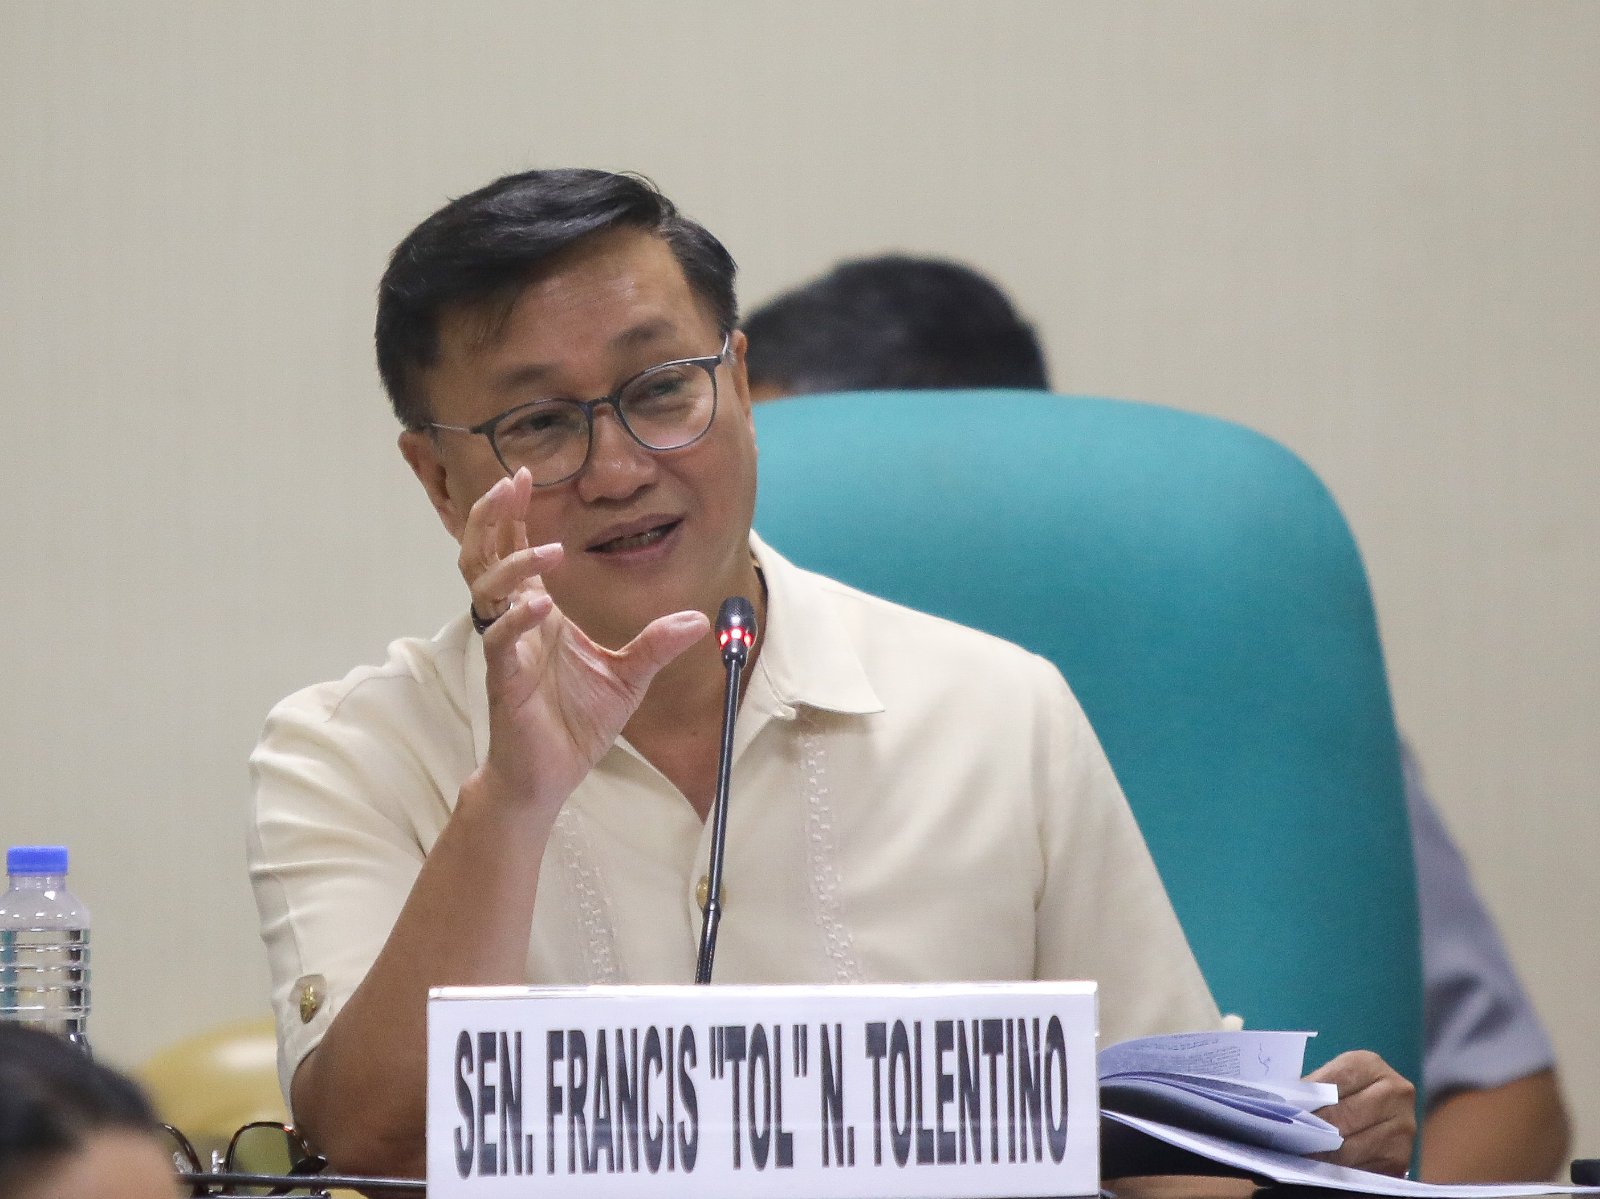 Senate Majority Floor Leader Francis Tolentino said his two motorcycle escorts, who were apprehended on May 29, for unauthorized use of police insignia, violated no laws.